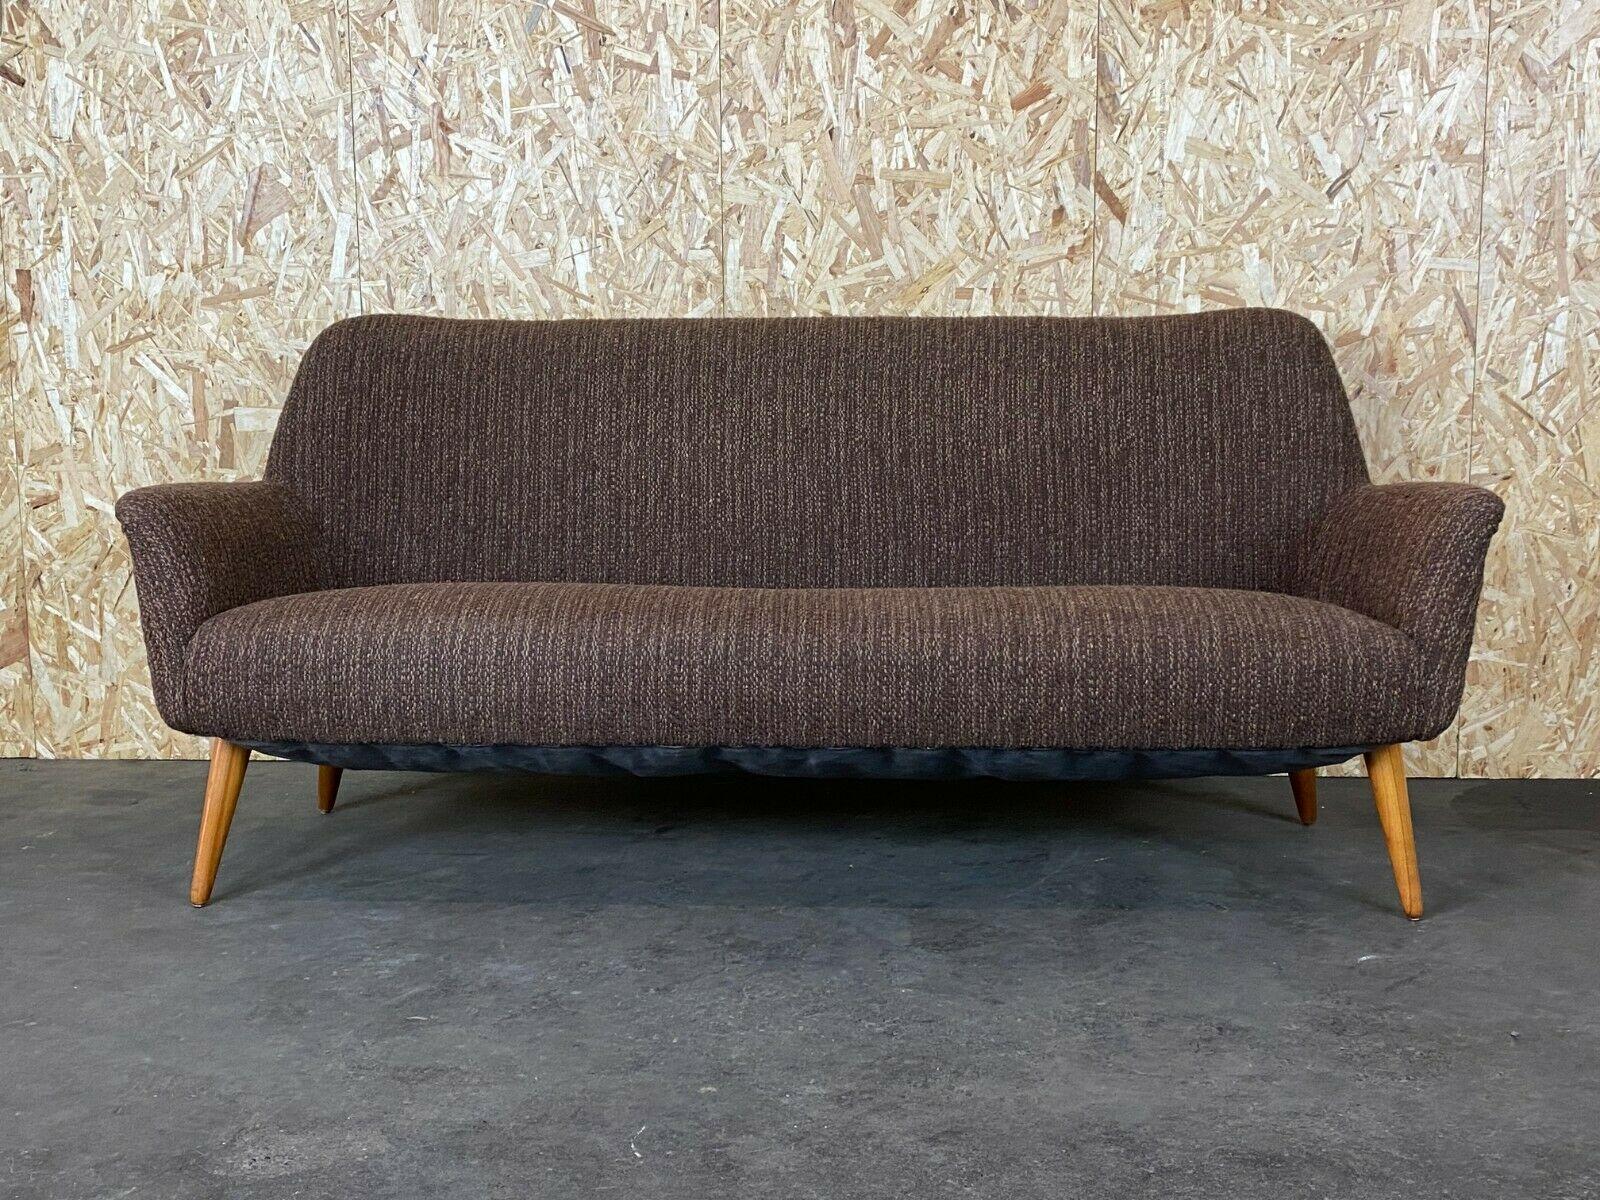 50s 60s cocktail sofa couch mid century kidney table era design 60s

Object: sofa

Manufacturer:

Condition: good - vintage

Age: around 1950-1960

Dimensions:

180cm x 81cm x 79cm
Seat height = 42cm

Other notes:

The pictures